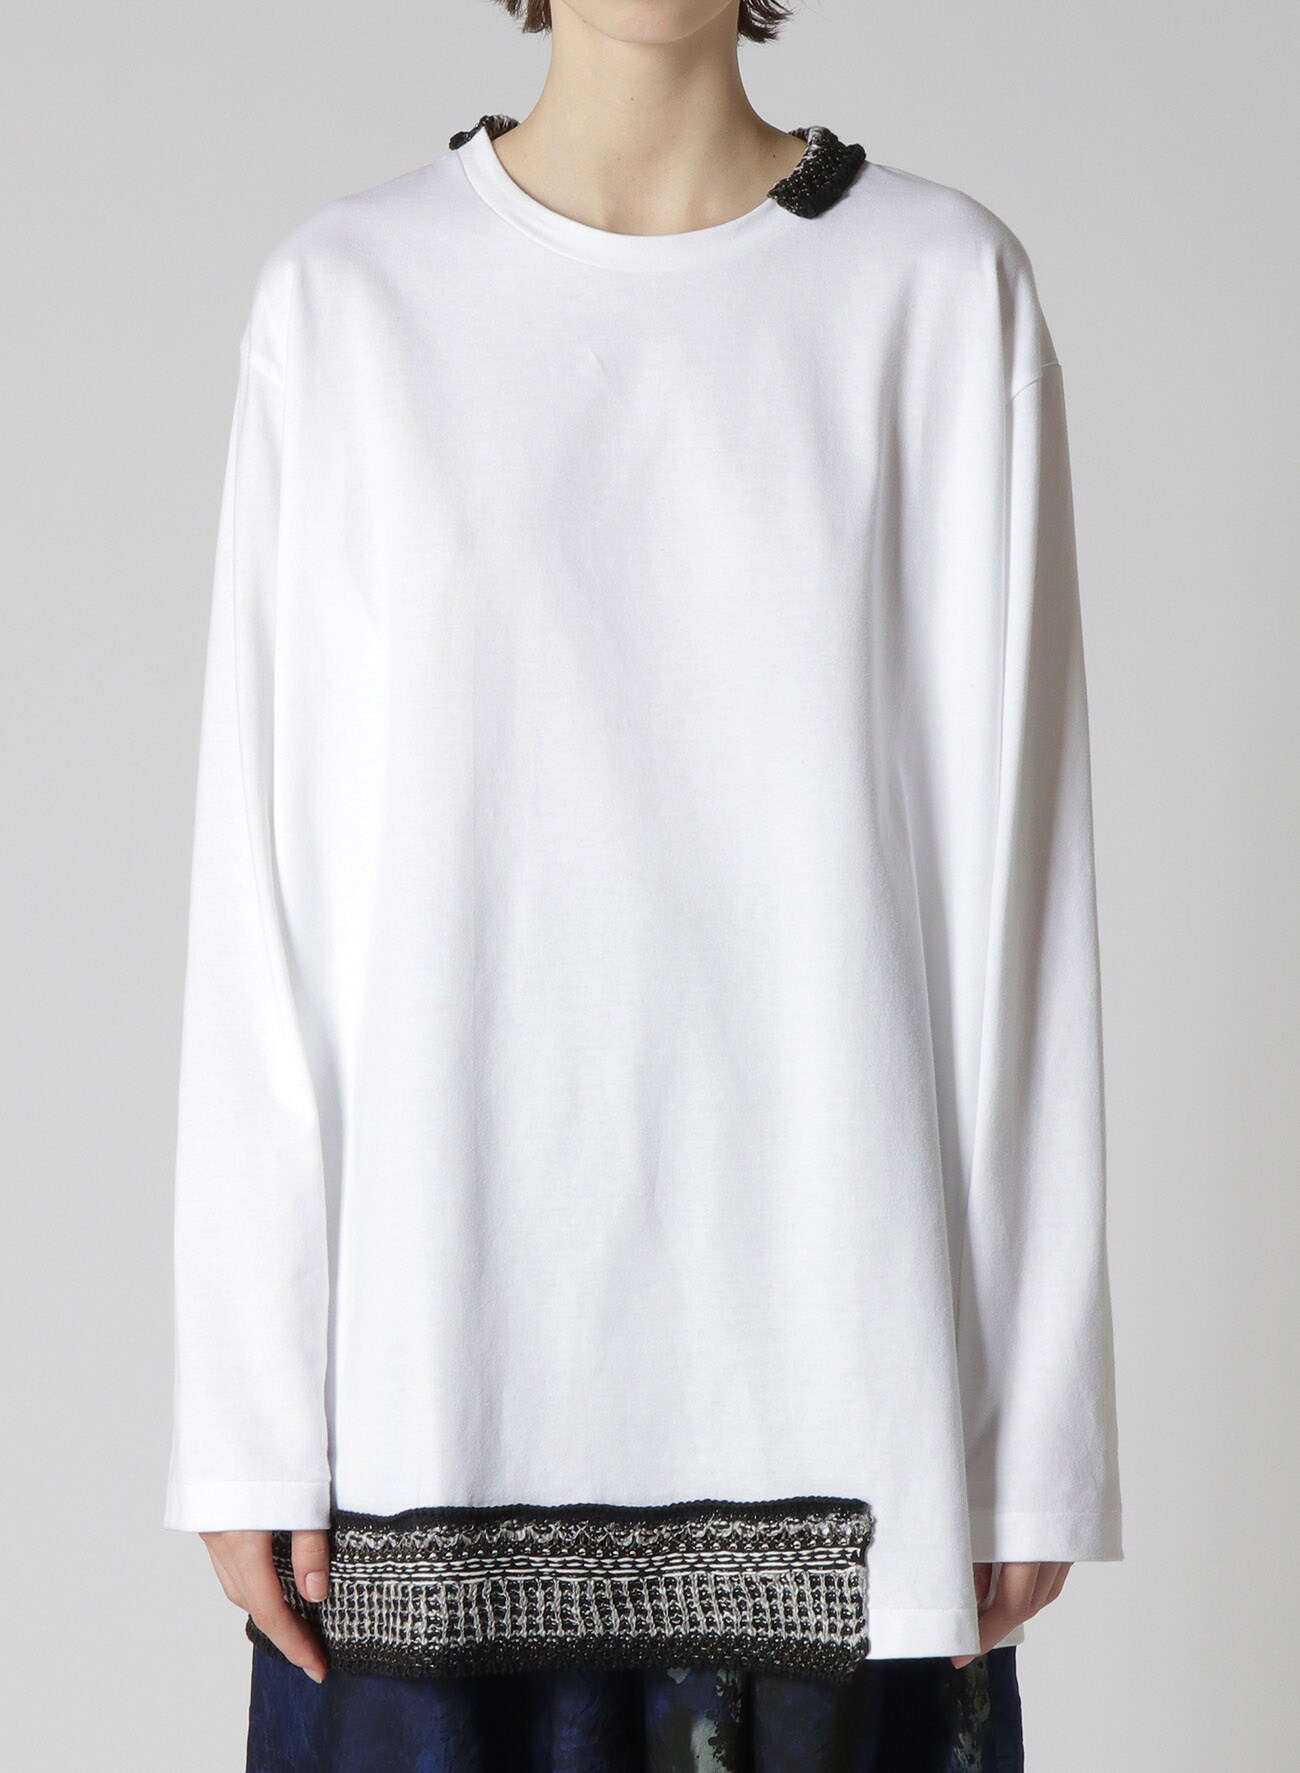 JERSEY AND NATIVE JACQUARD KNIT ATTACHED LONG SLEEVE BIG T